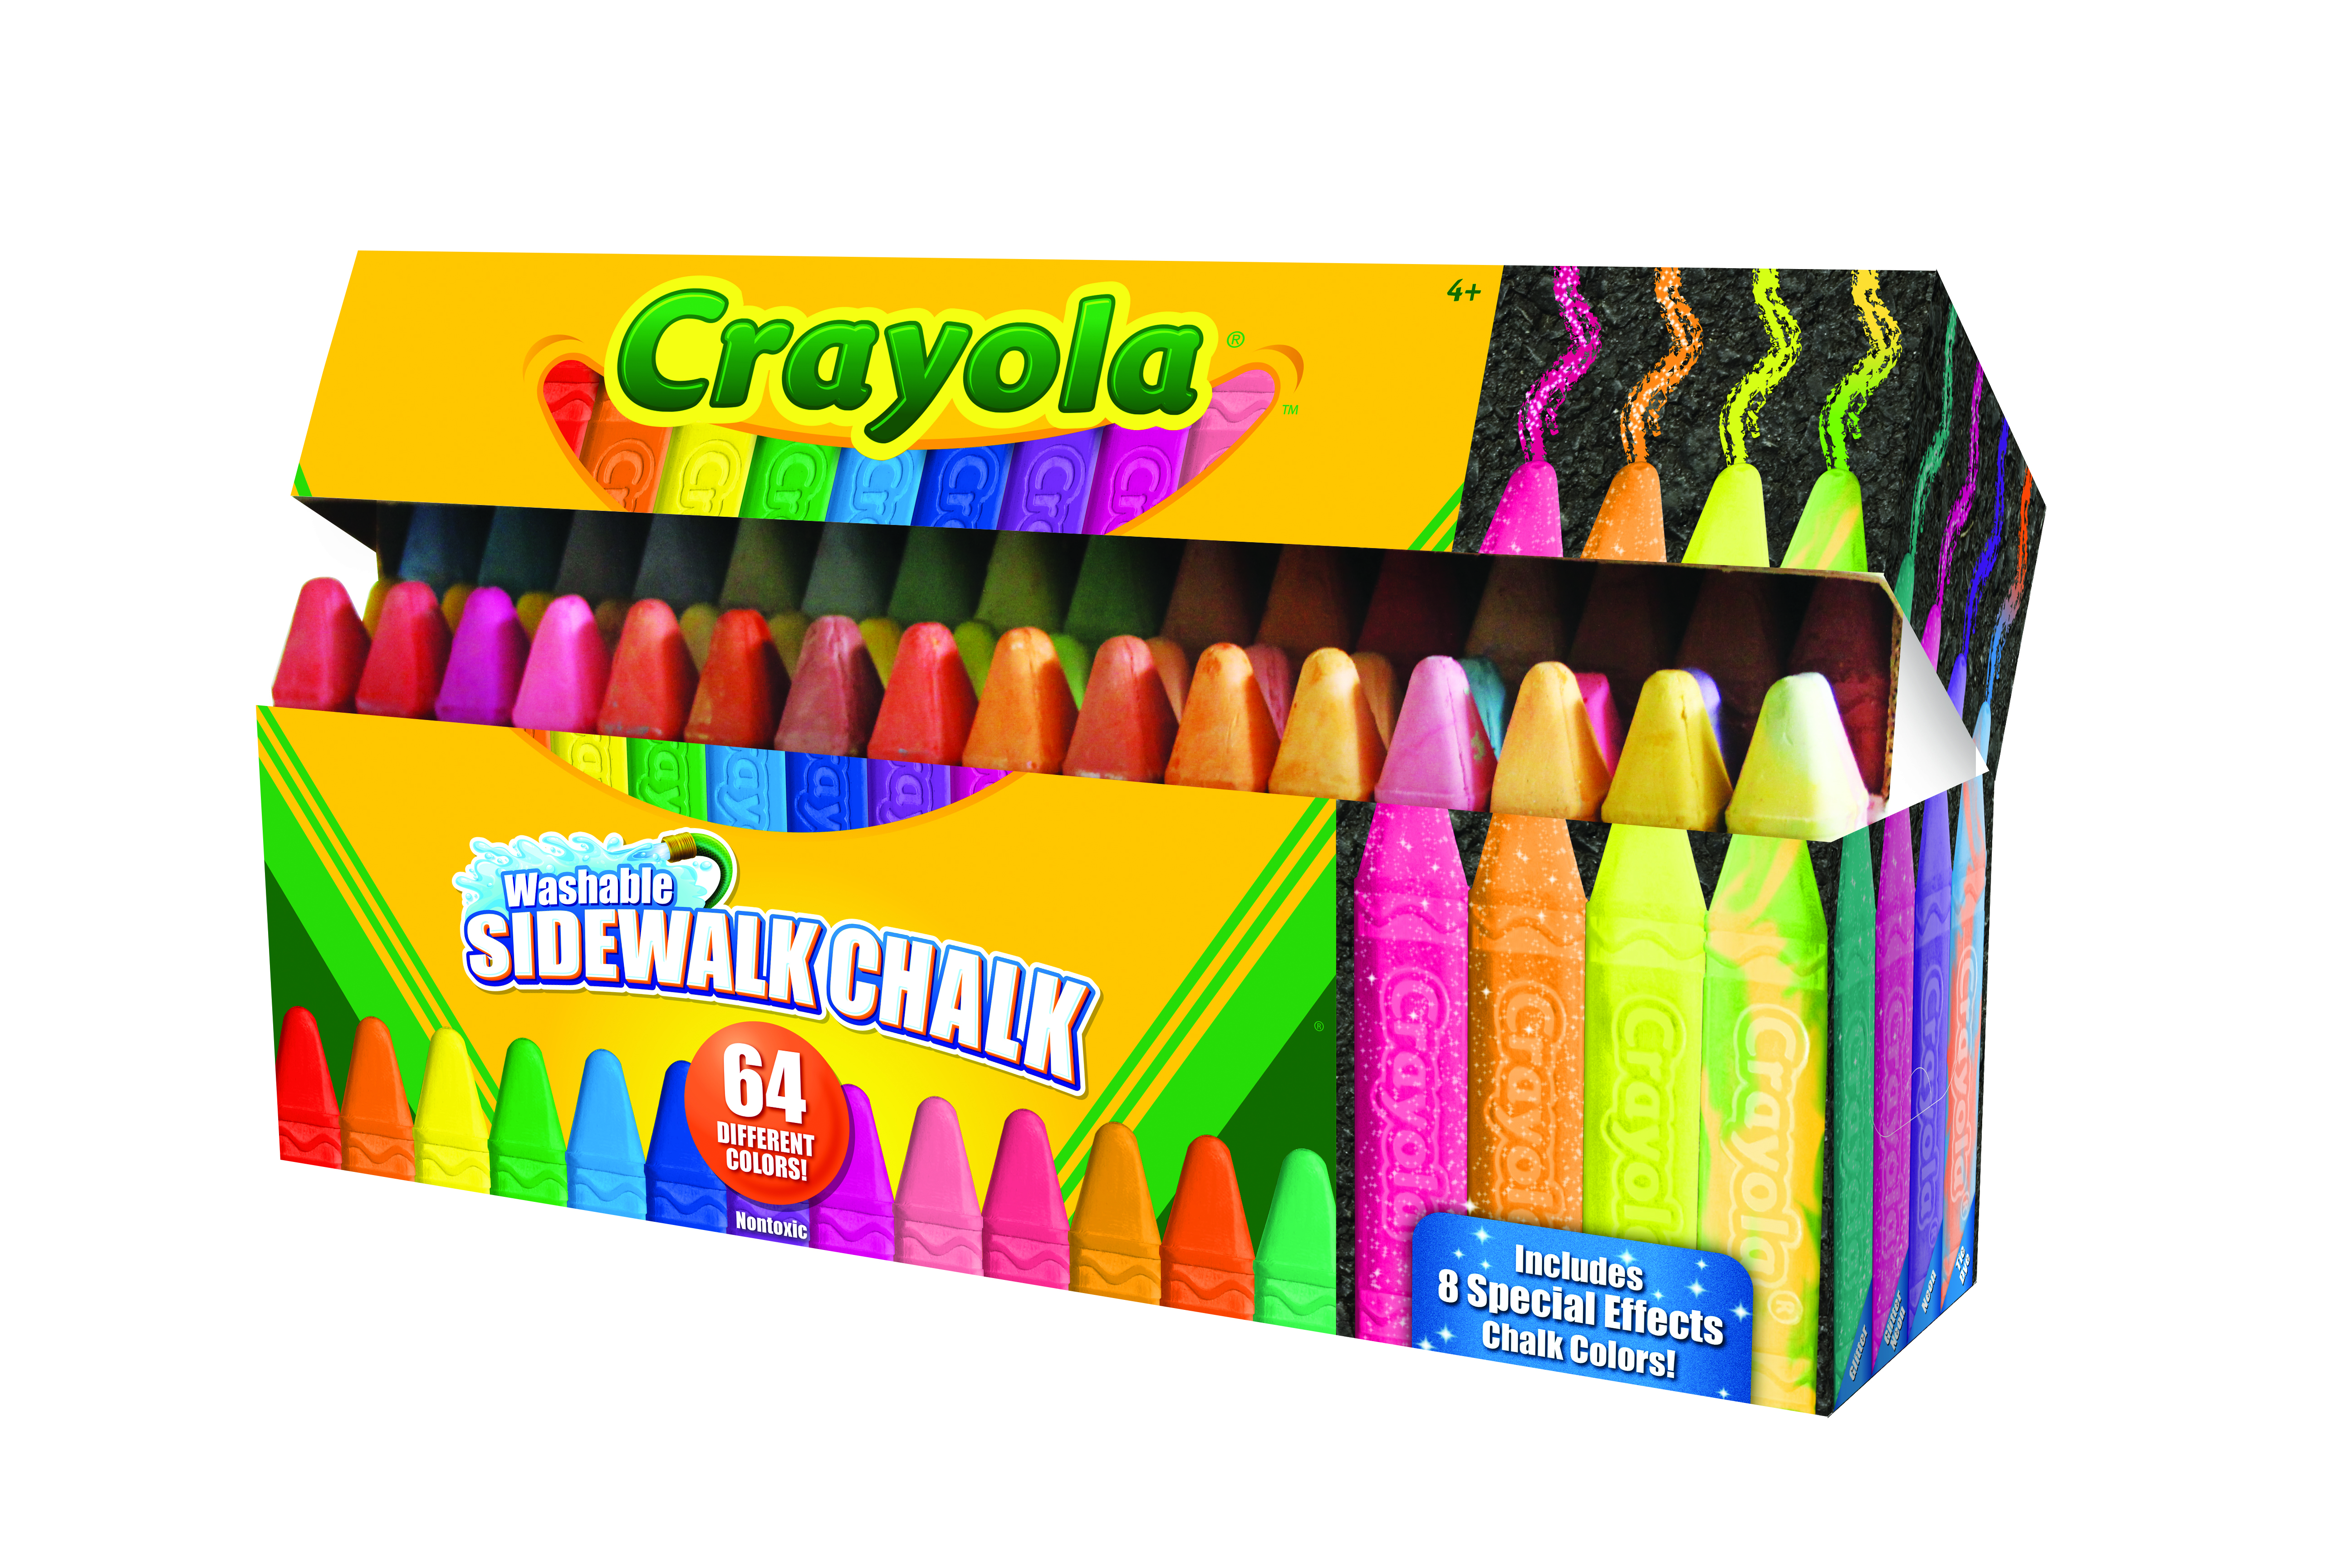 64 Count Sidewalk Chalk. Washable sidewalk chalk now available in 64 unique colors by Crayola, LLC.